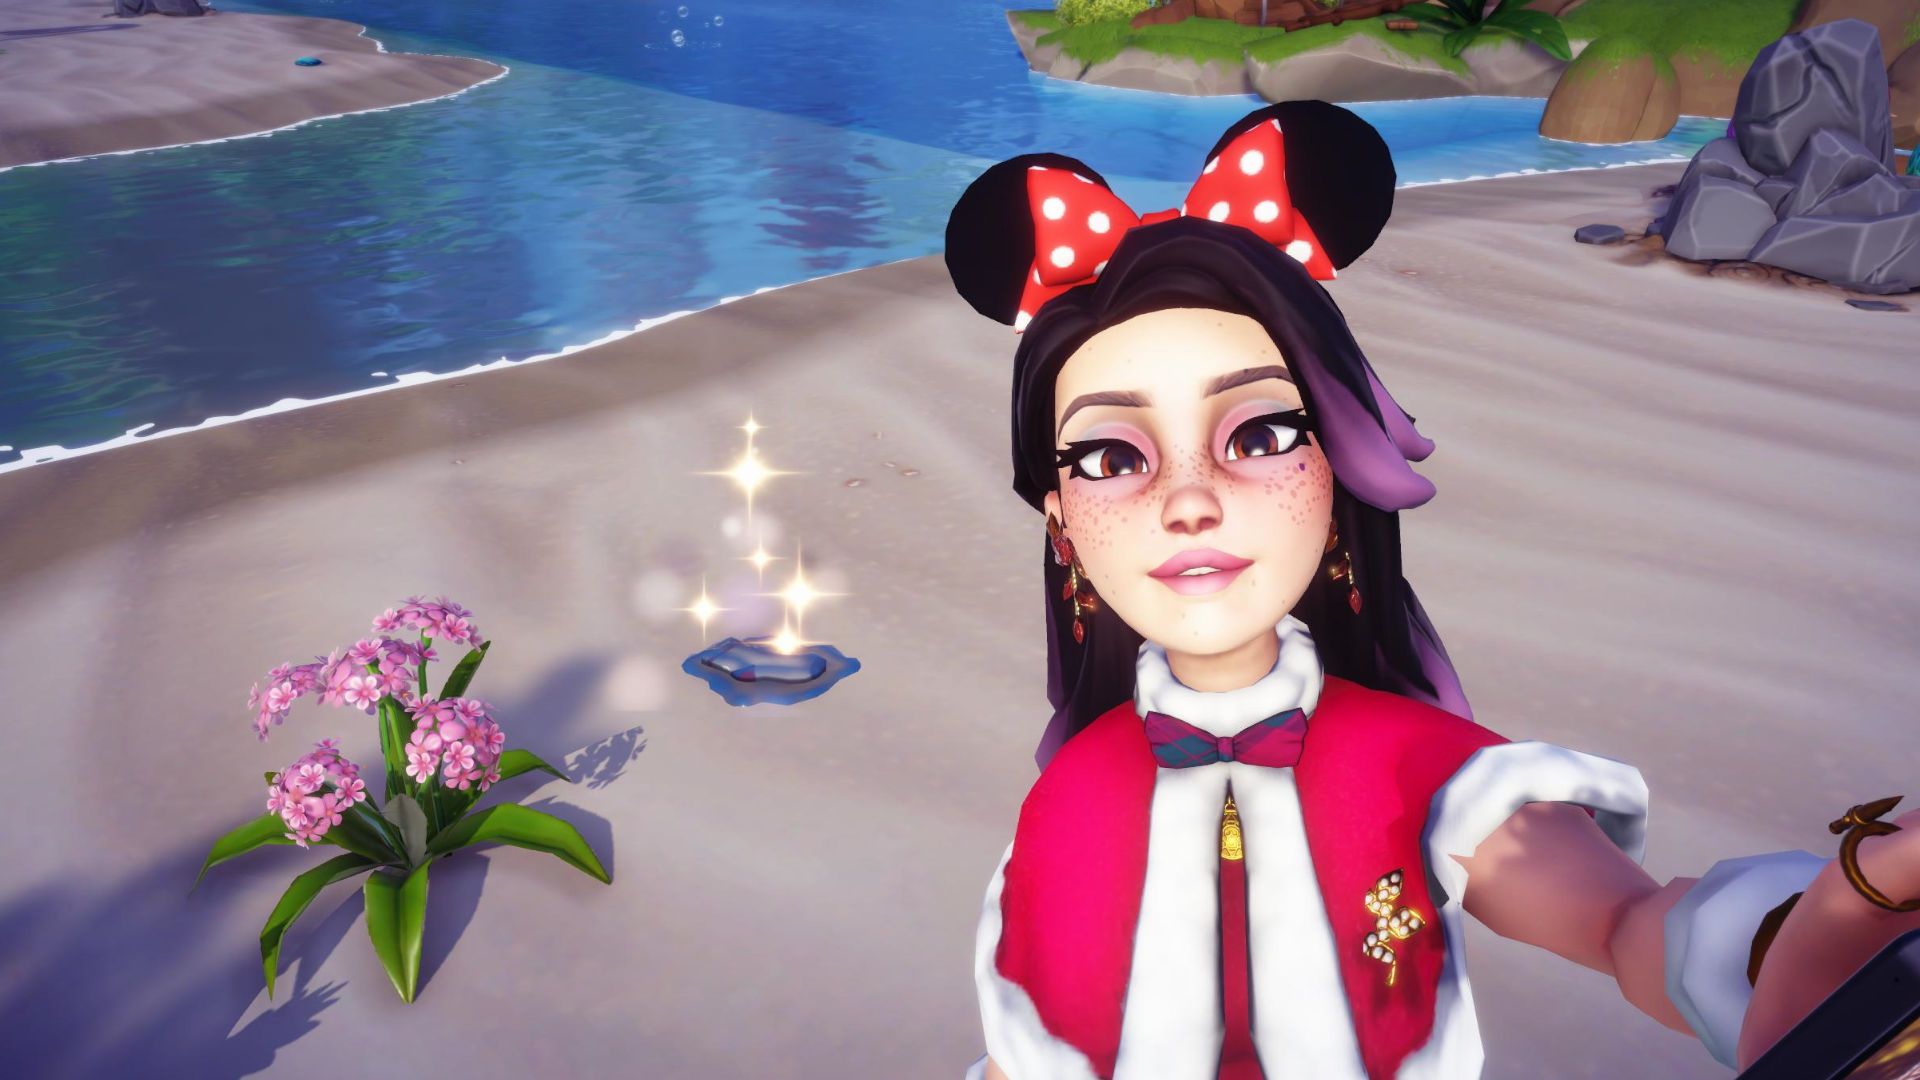 Disney Dreamlight Valley: How to get Stitch